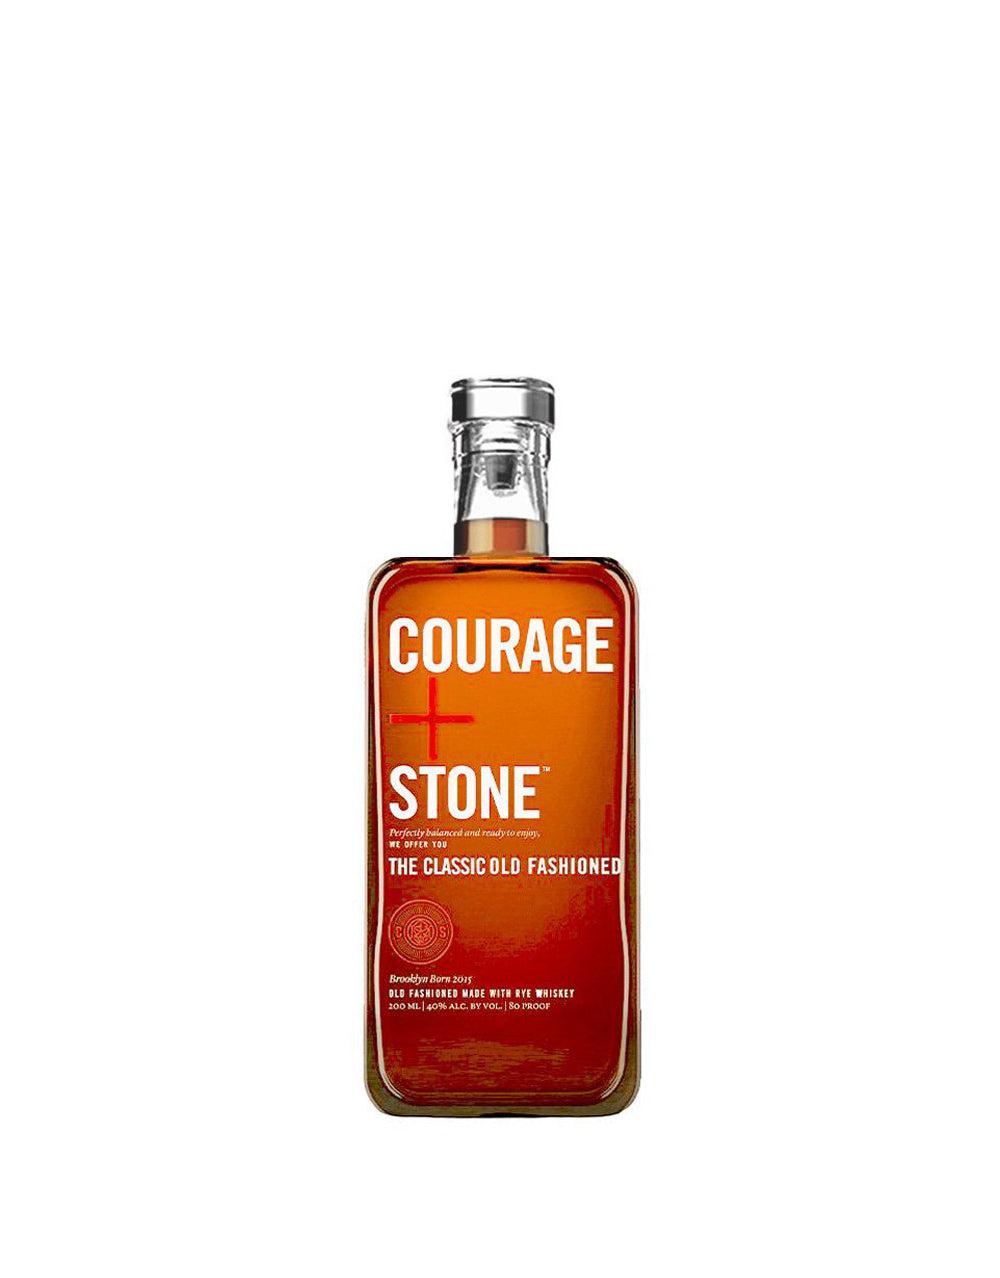 Courage+Stone Old Fashioned